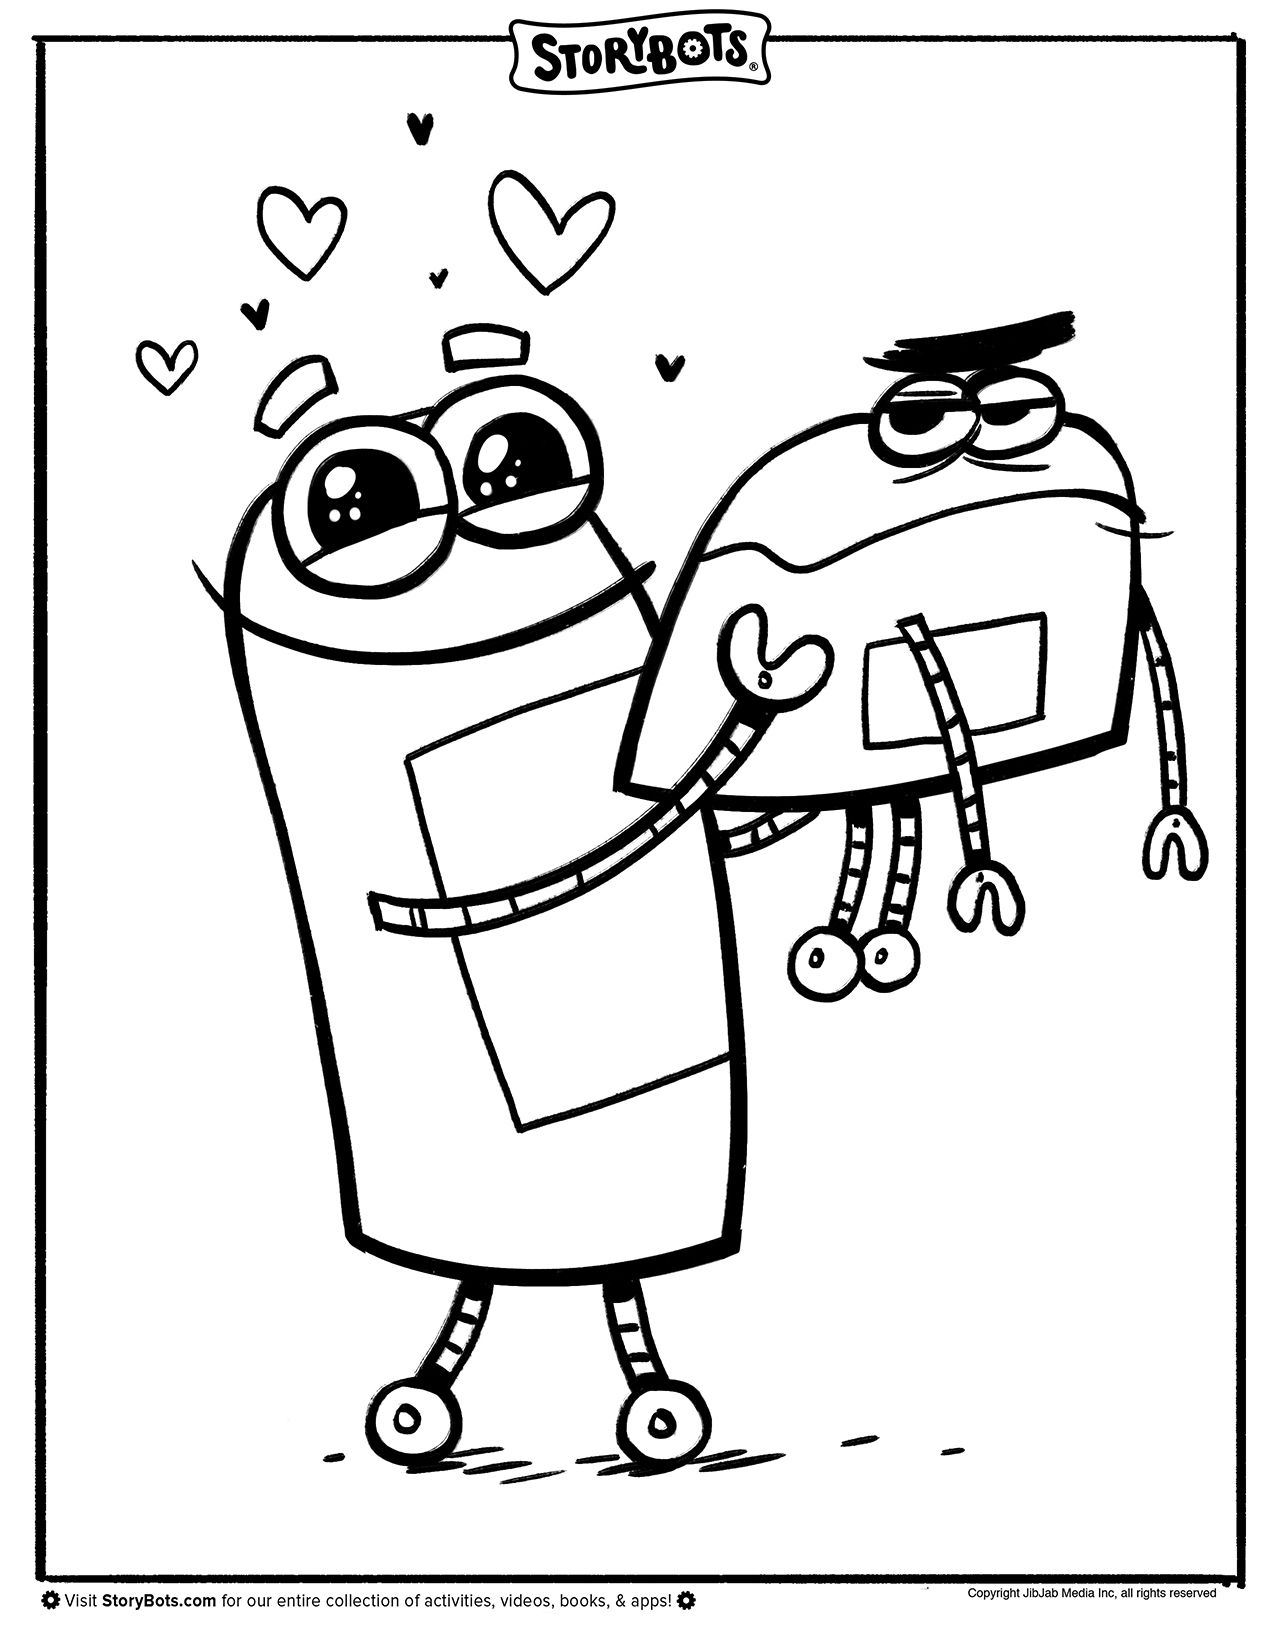 Hearts Storybots Coloring Pages